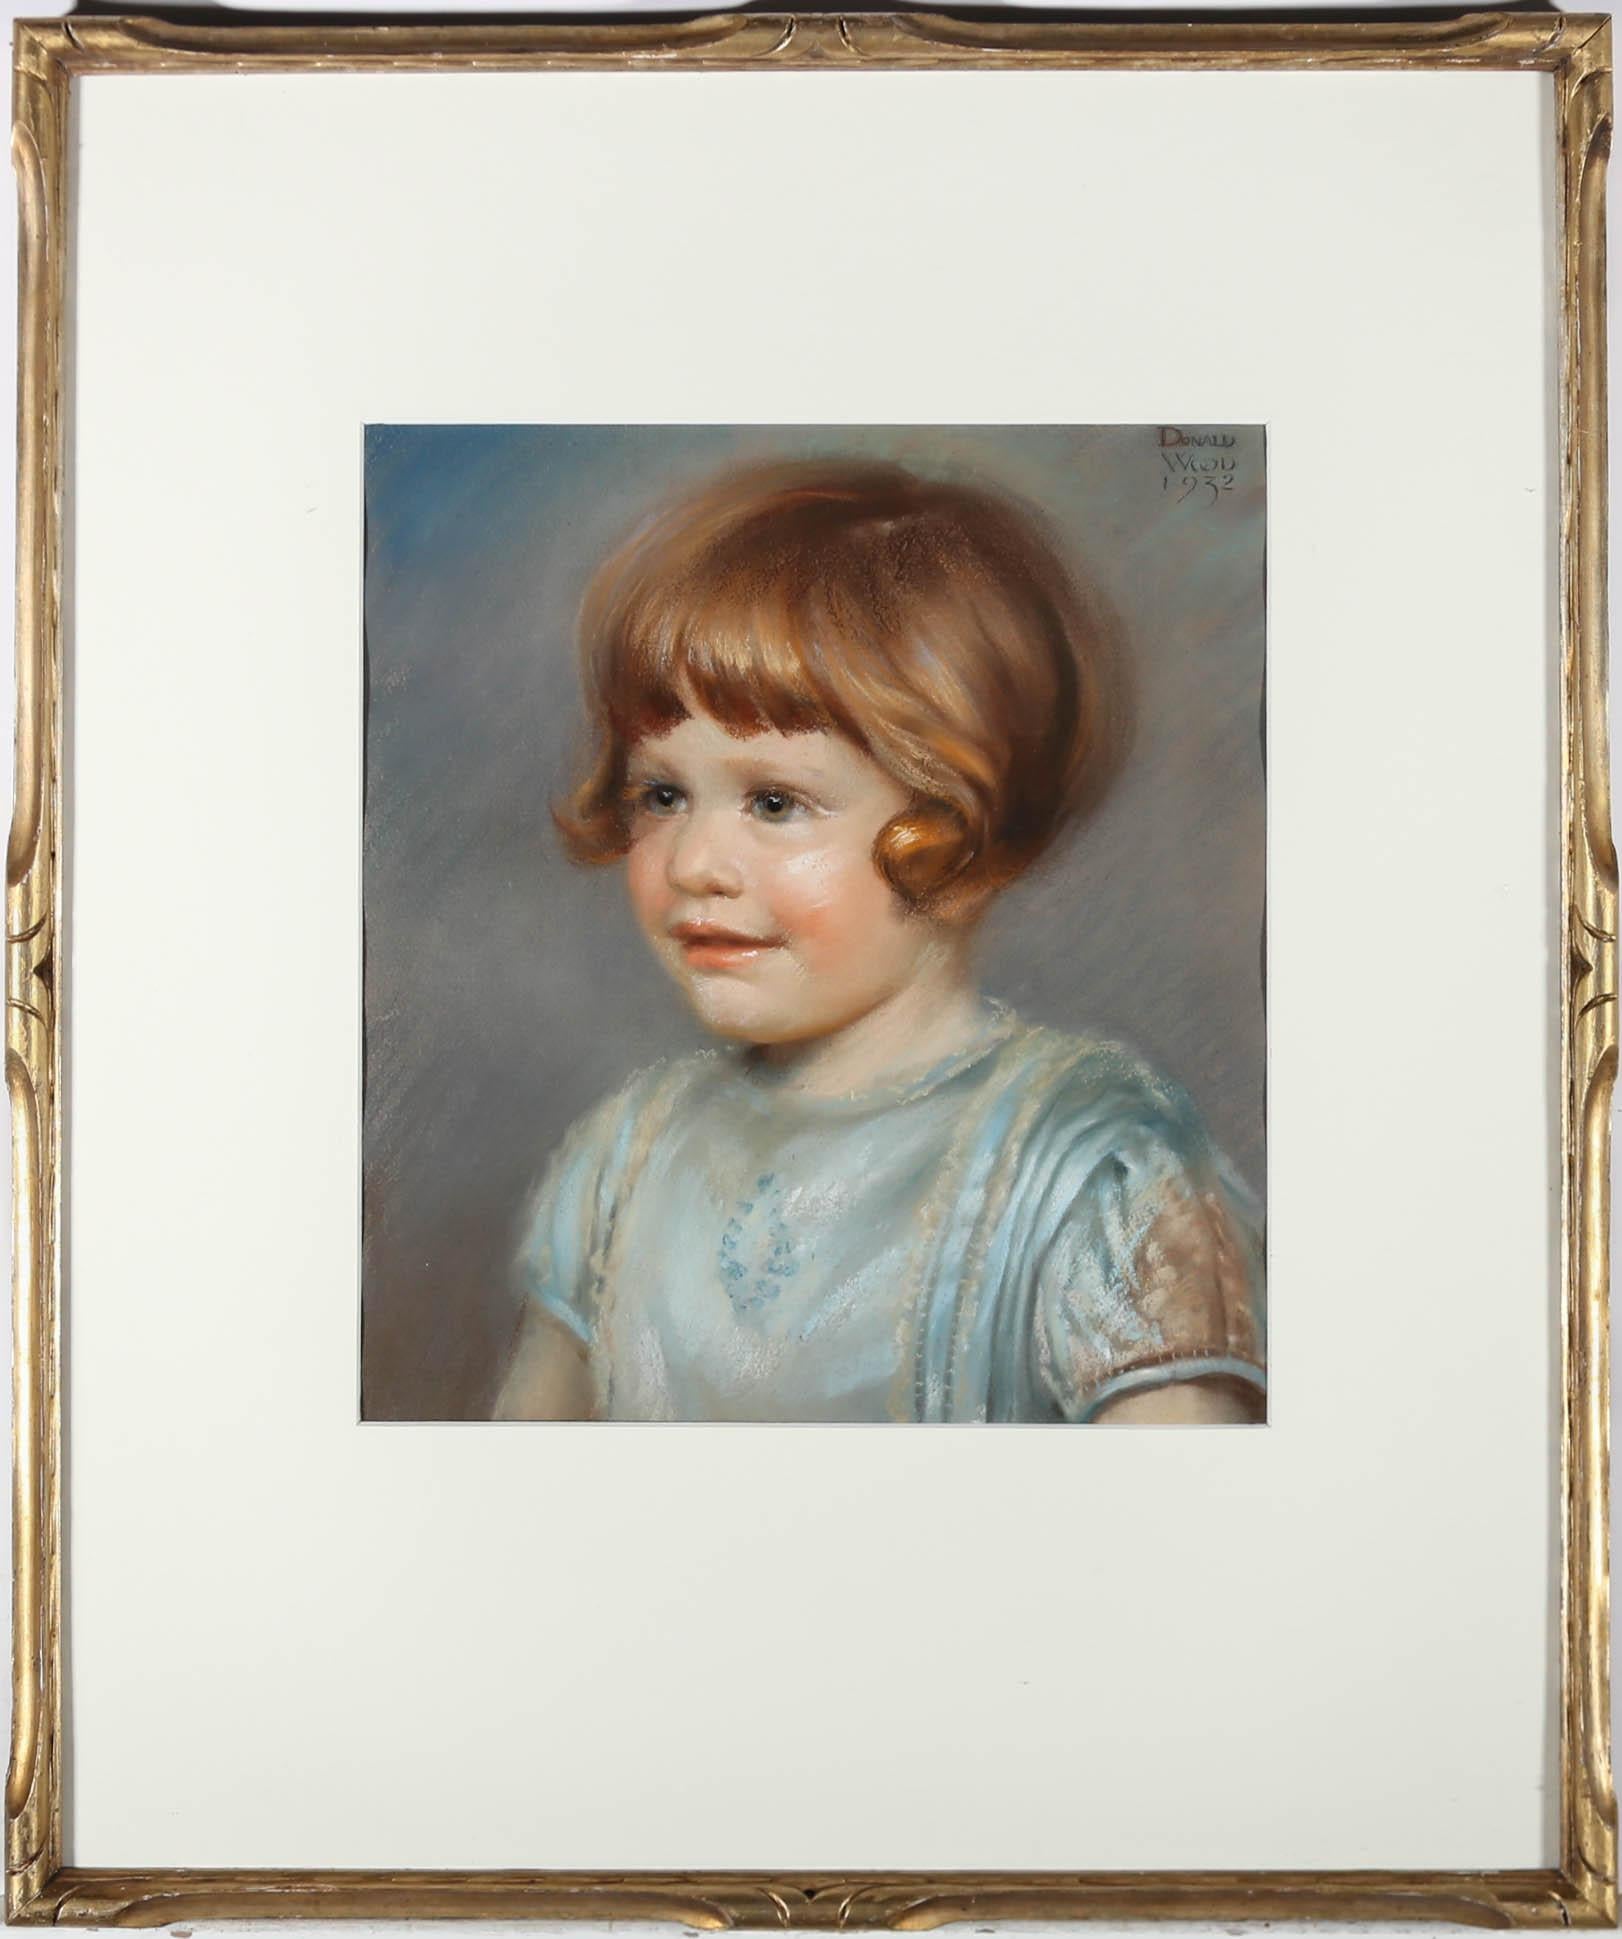 A fine head and shoulders portrait of an innocent young girl, delicately depicted in soft pastel by British artist Donald Wood (1889-1953). The drawing has been carefully signed and dated to the upper right corner. Beautifully mounted in an elegant